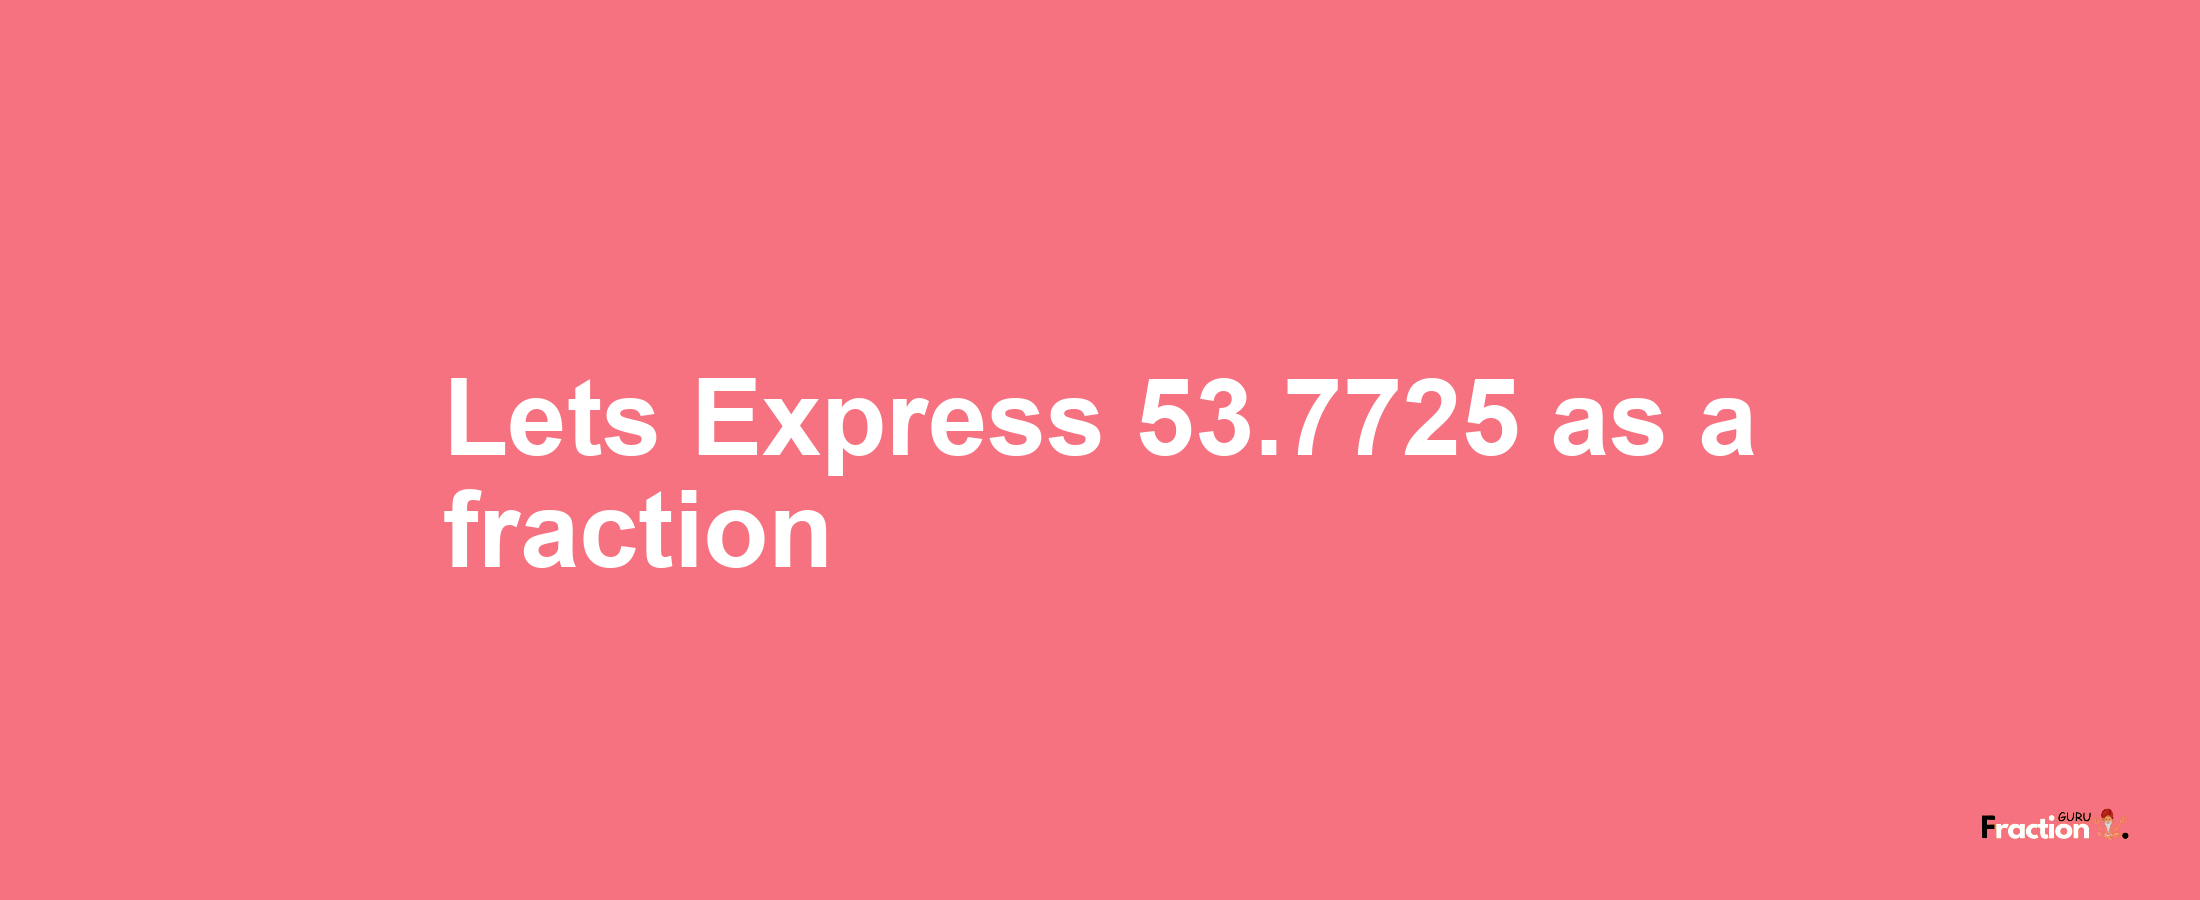 Lets Express 53.7725 as afraction